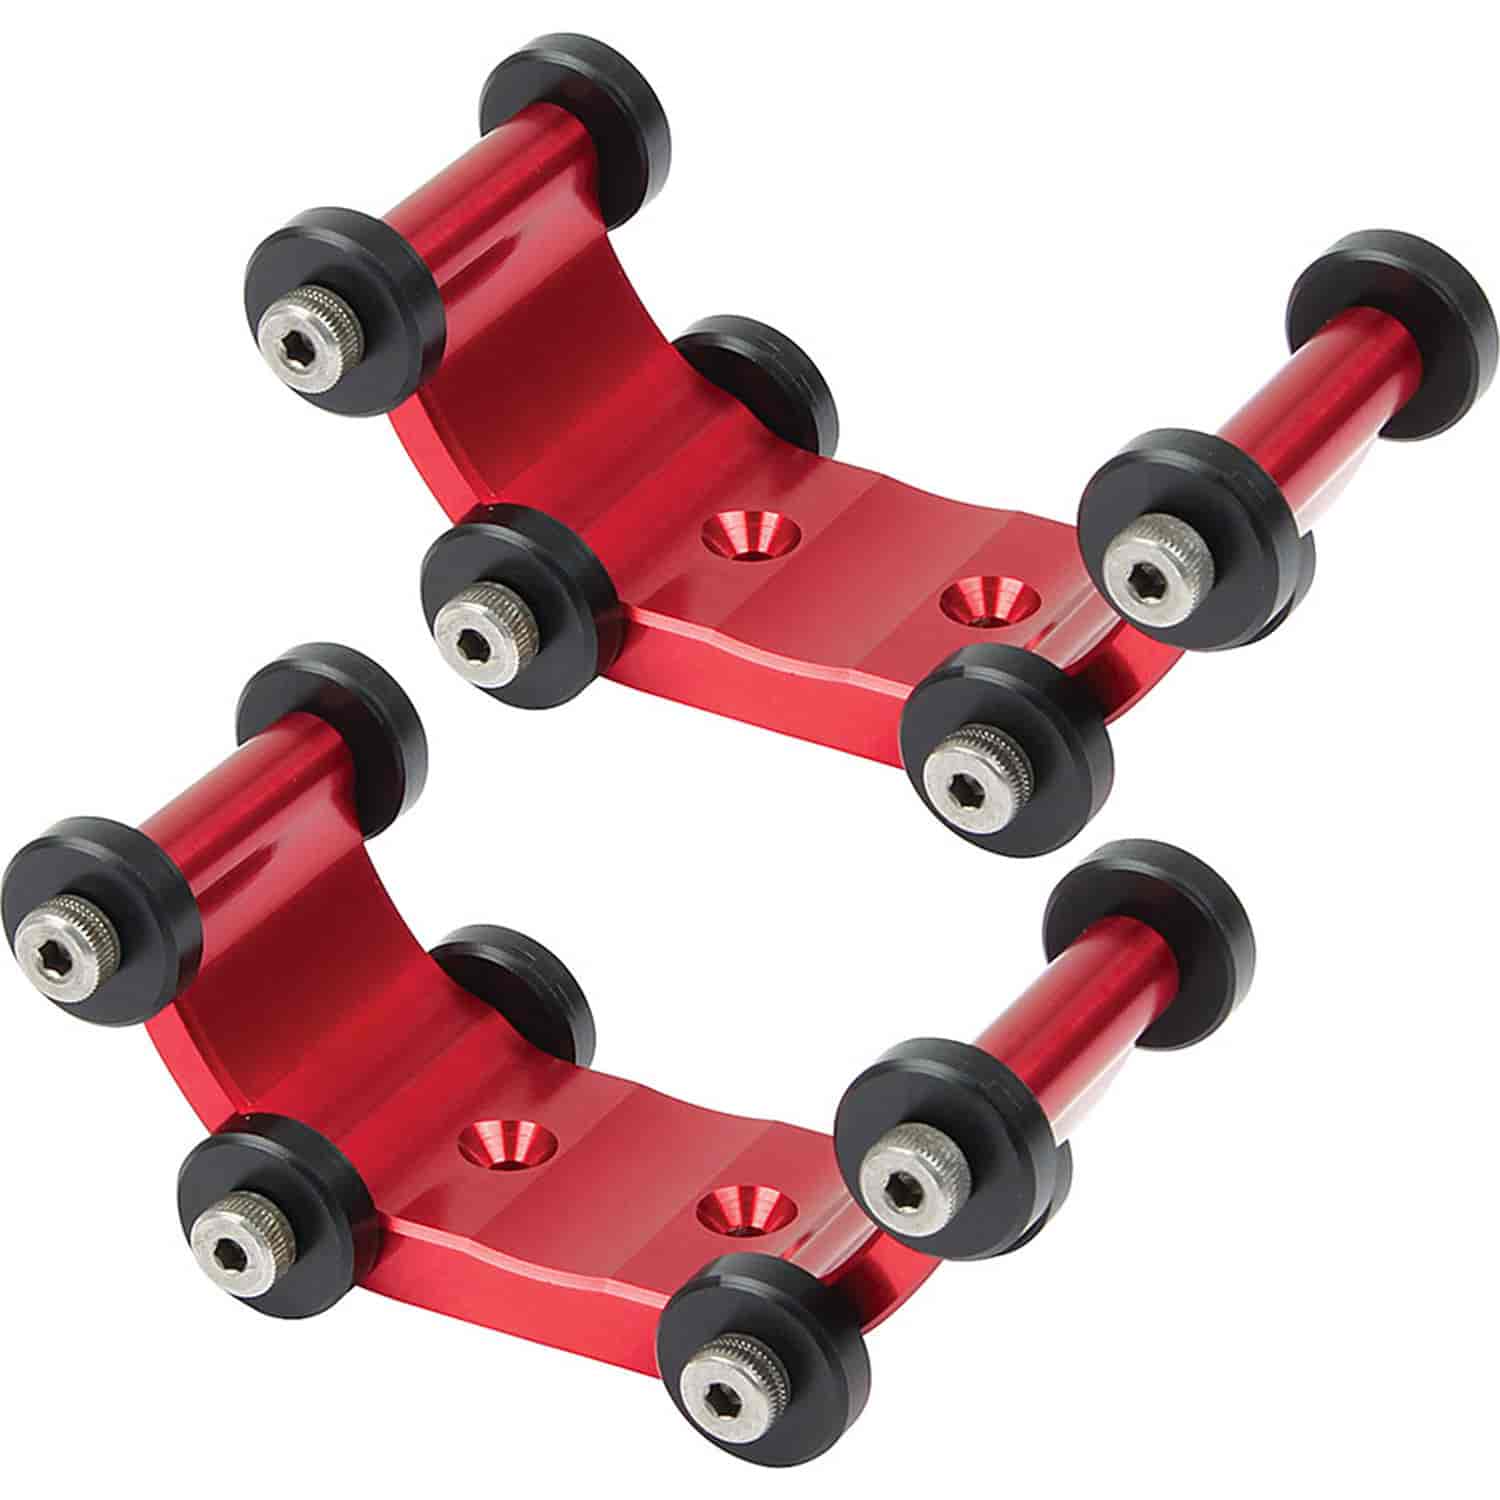 Live Axle Cradle Rollers 2-Pack